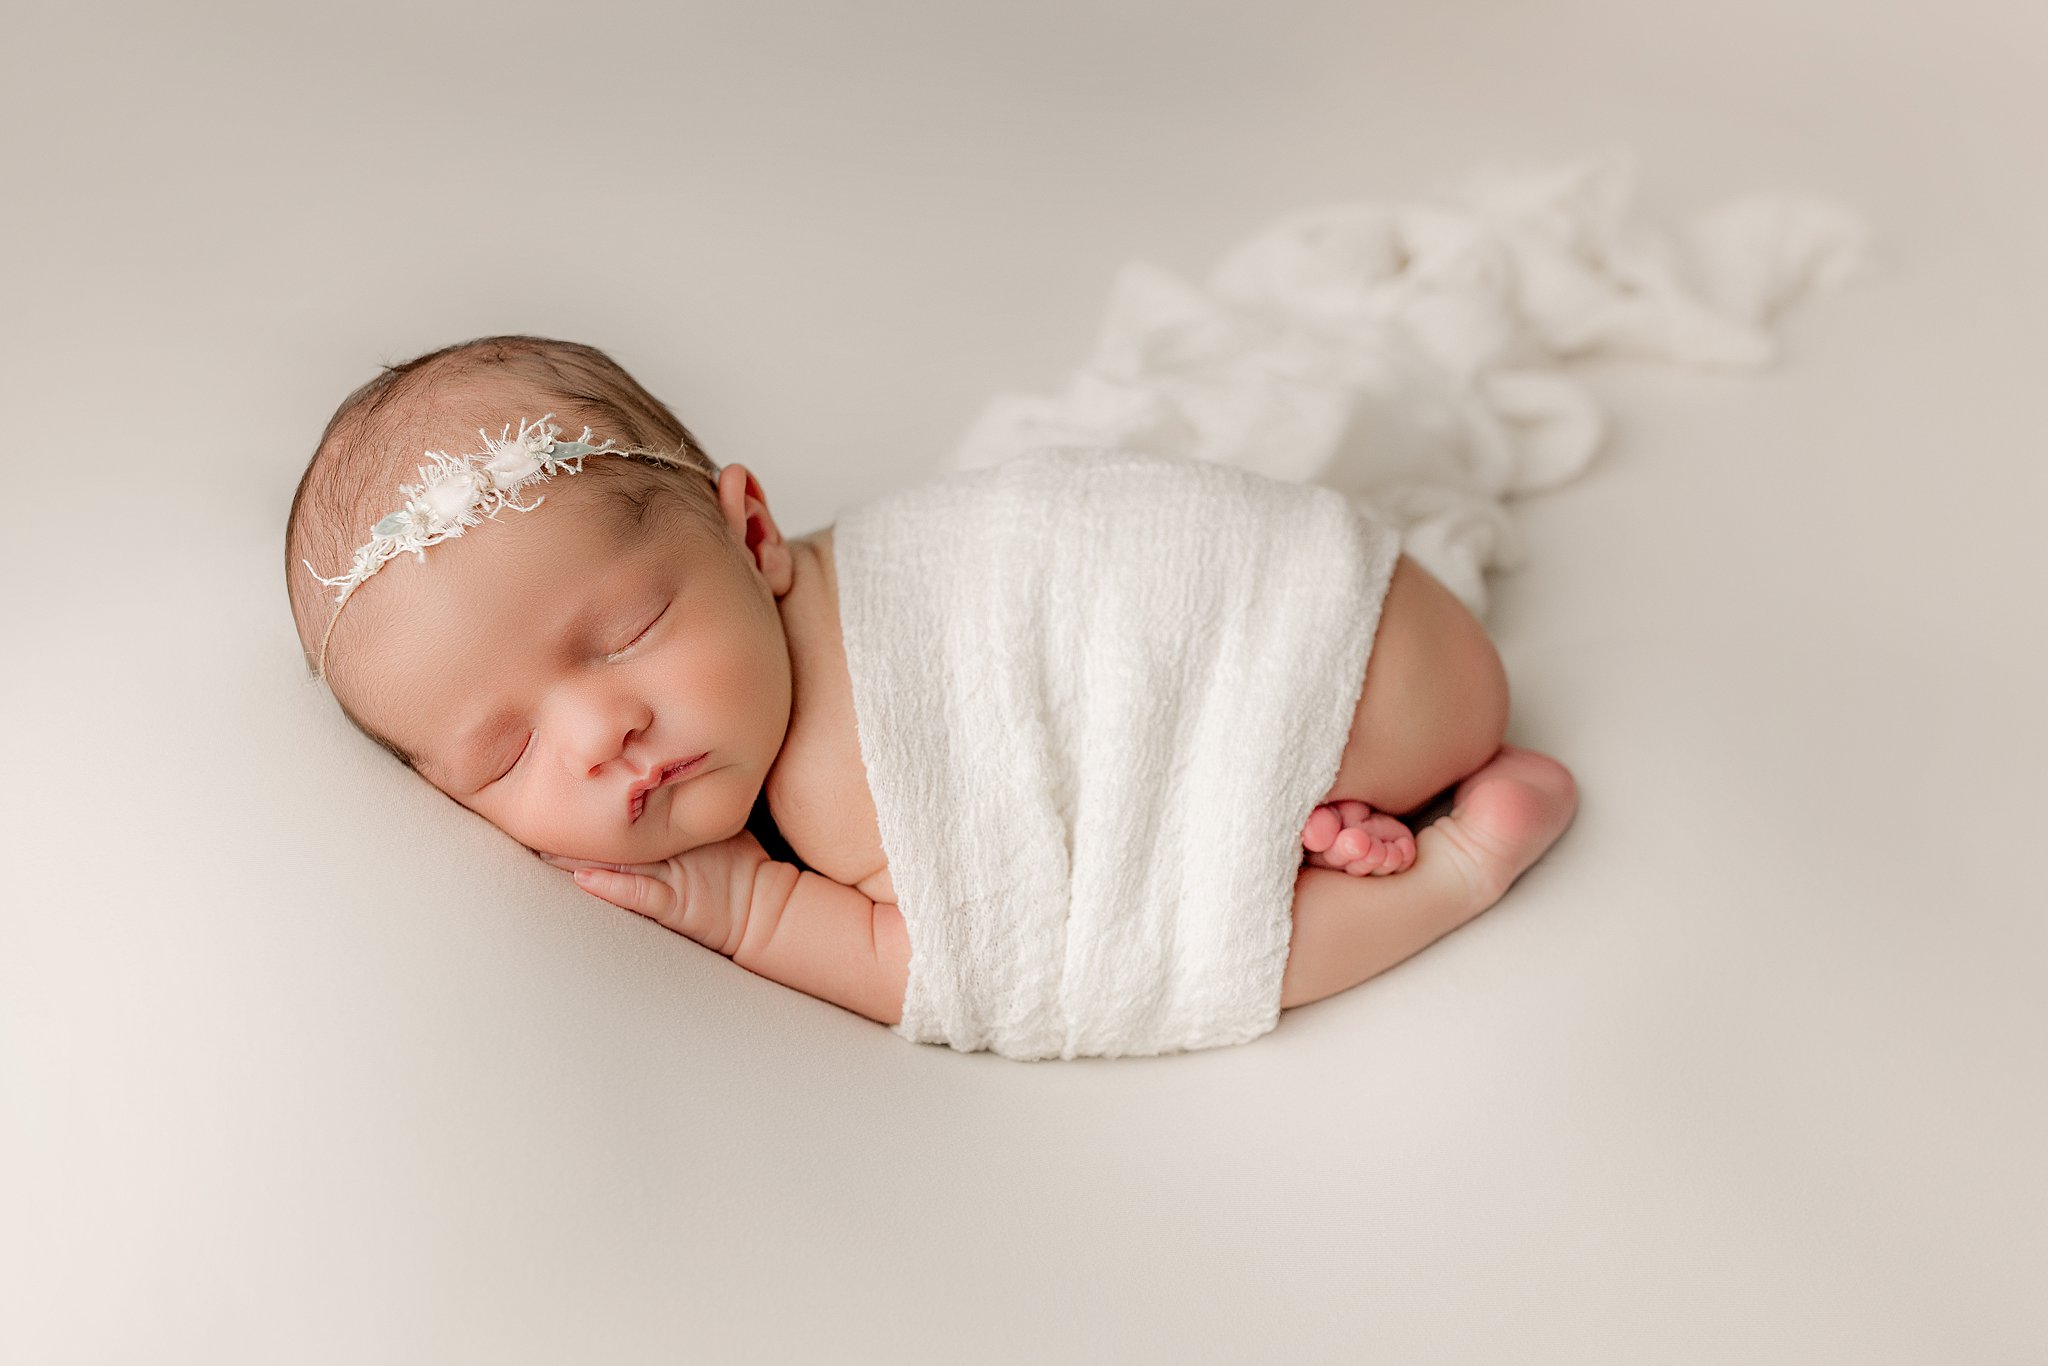 A newborn baby sleeps while wrapped in a white blanket in froggy pose ellifox